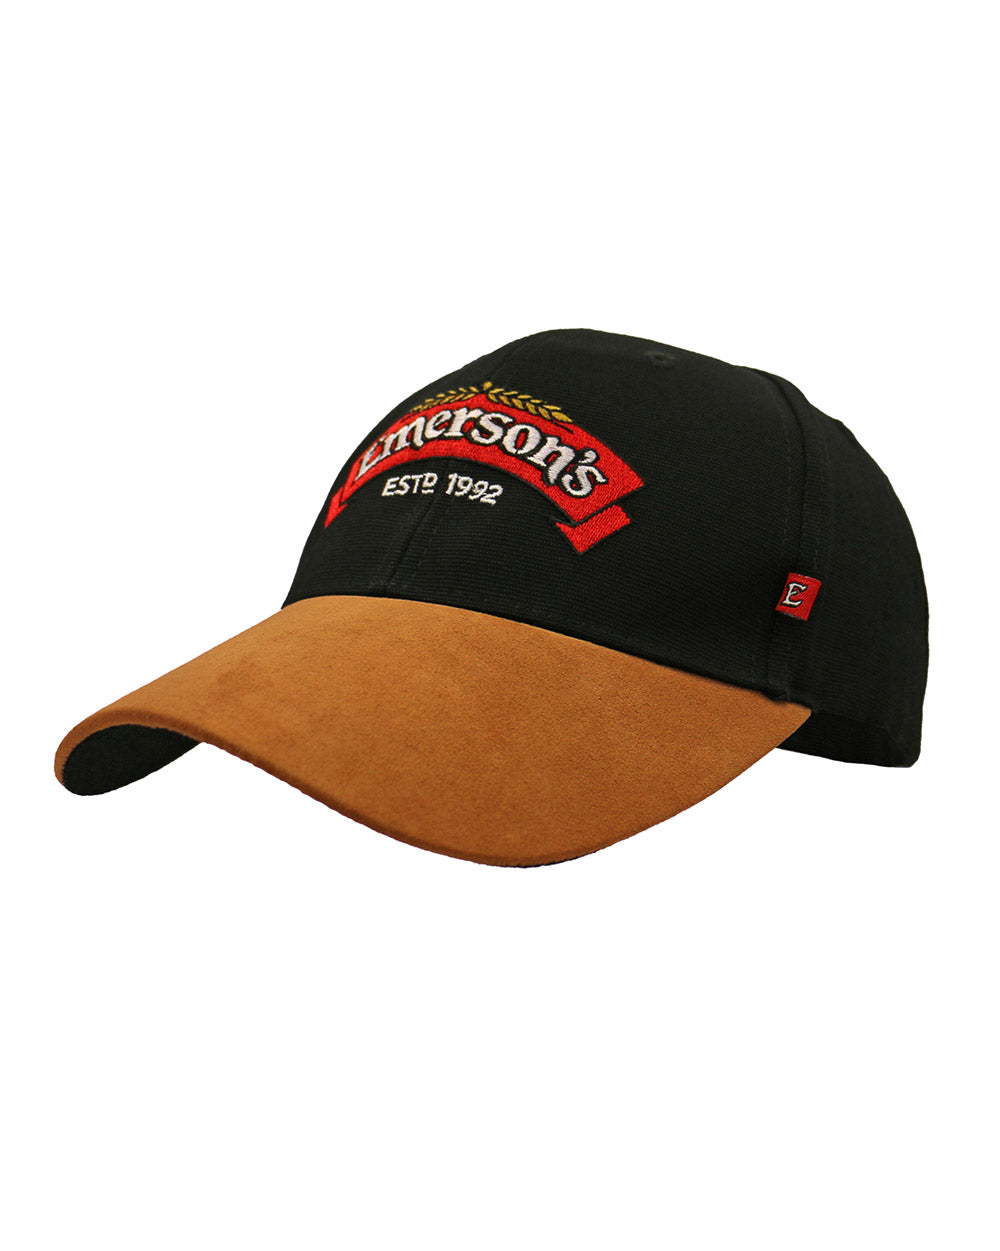 Emerson's Cap -  Beer Gear Apparel & Merchandise - speights - lion red - vb - tokyo dry merch